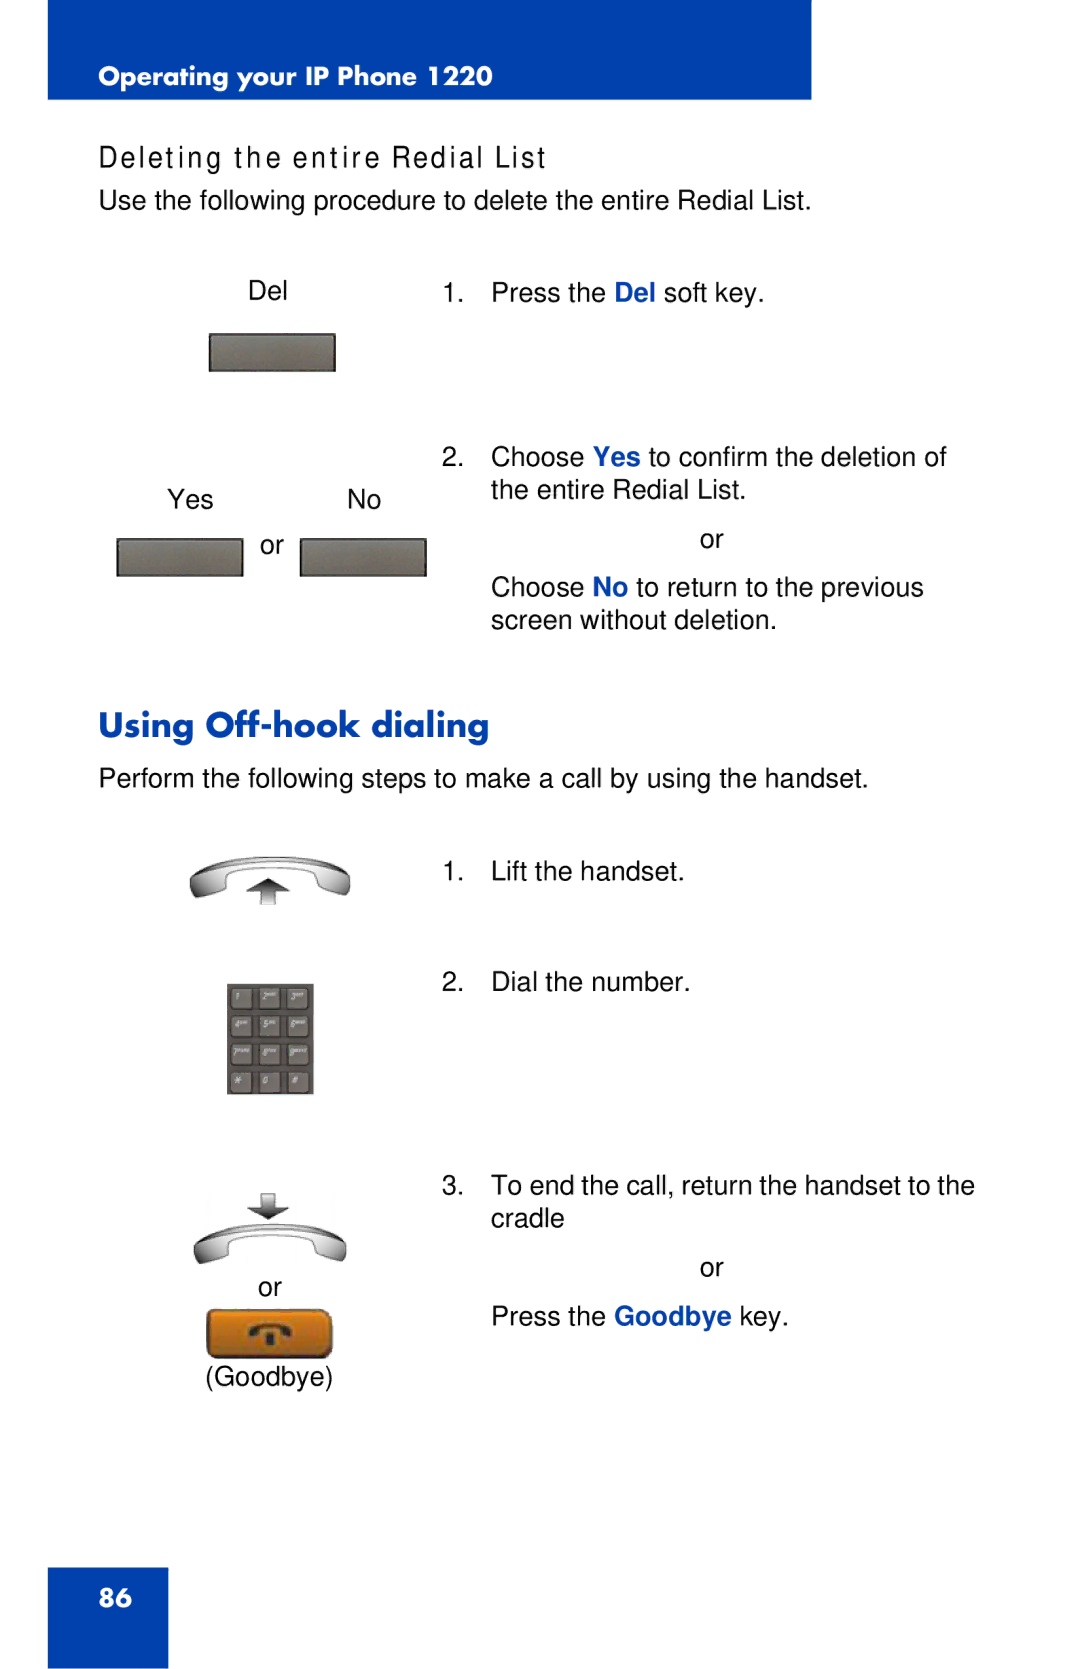 Nortel Networks IP Phone 1220 manual Using Off-hook dialing, Deleting the entire Redial List 